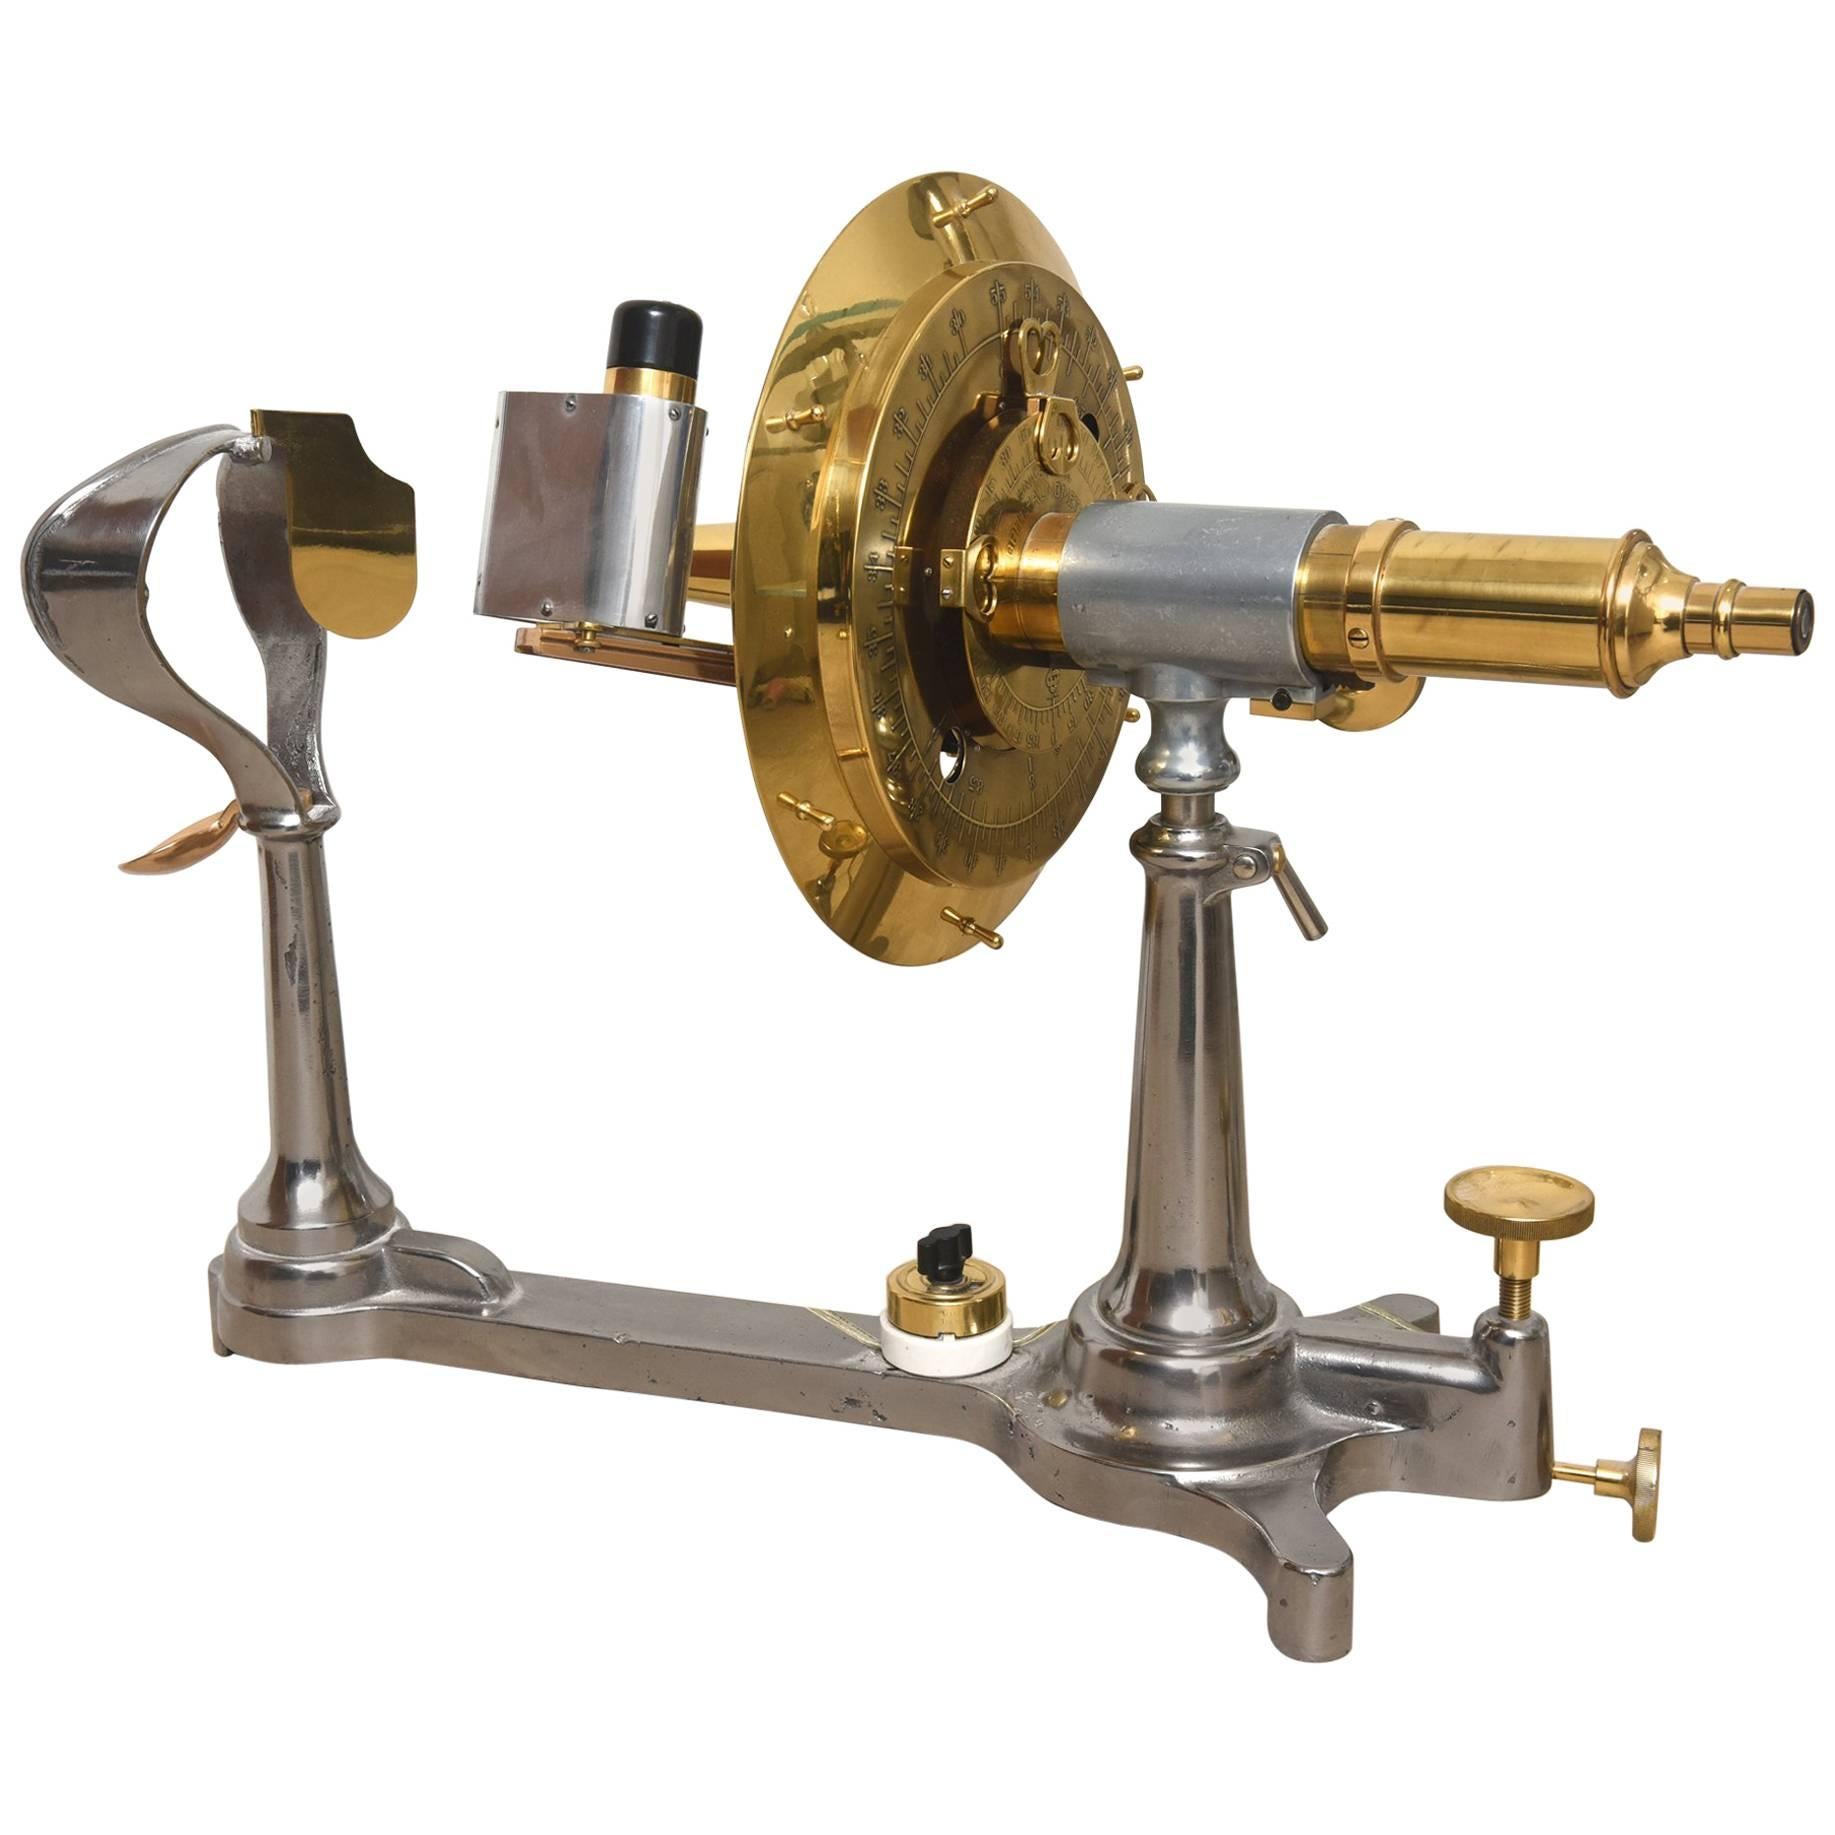 Restored Antique Brass and Iron Universal Ophthalmometer for Optician / Eye Dr